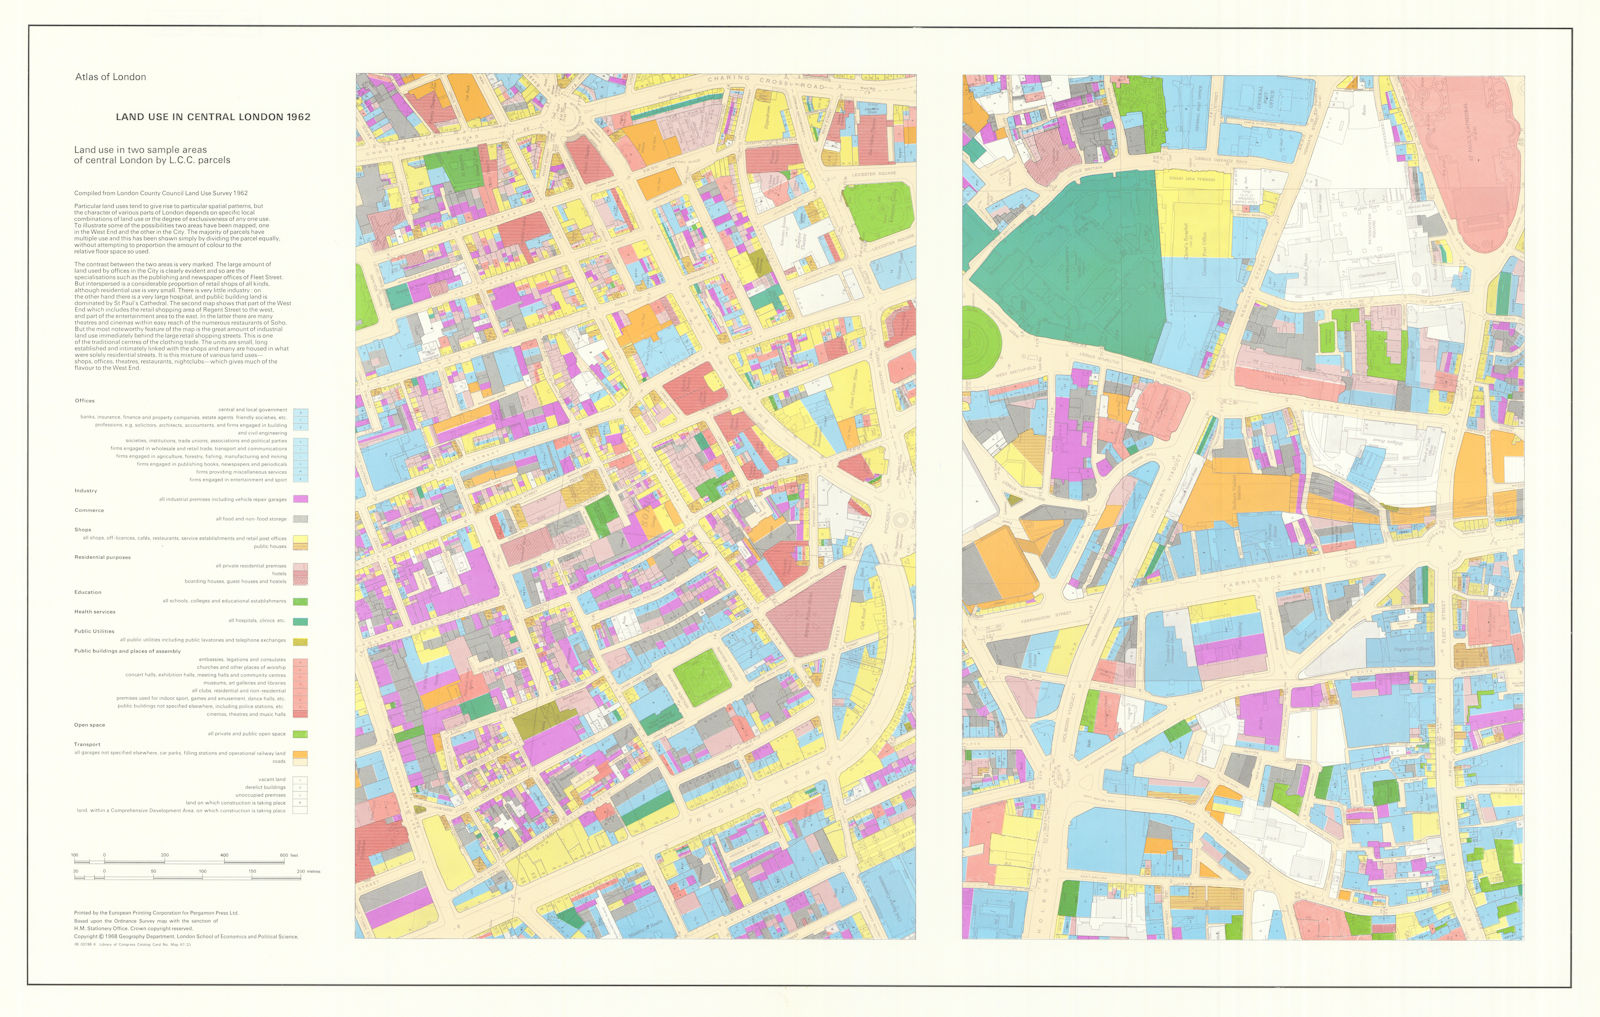 Central London 1962 land use. West End Holborn. Industrial & Warehouses 1968 map